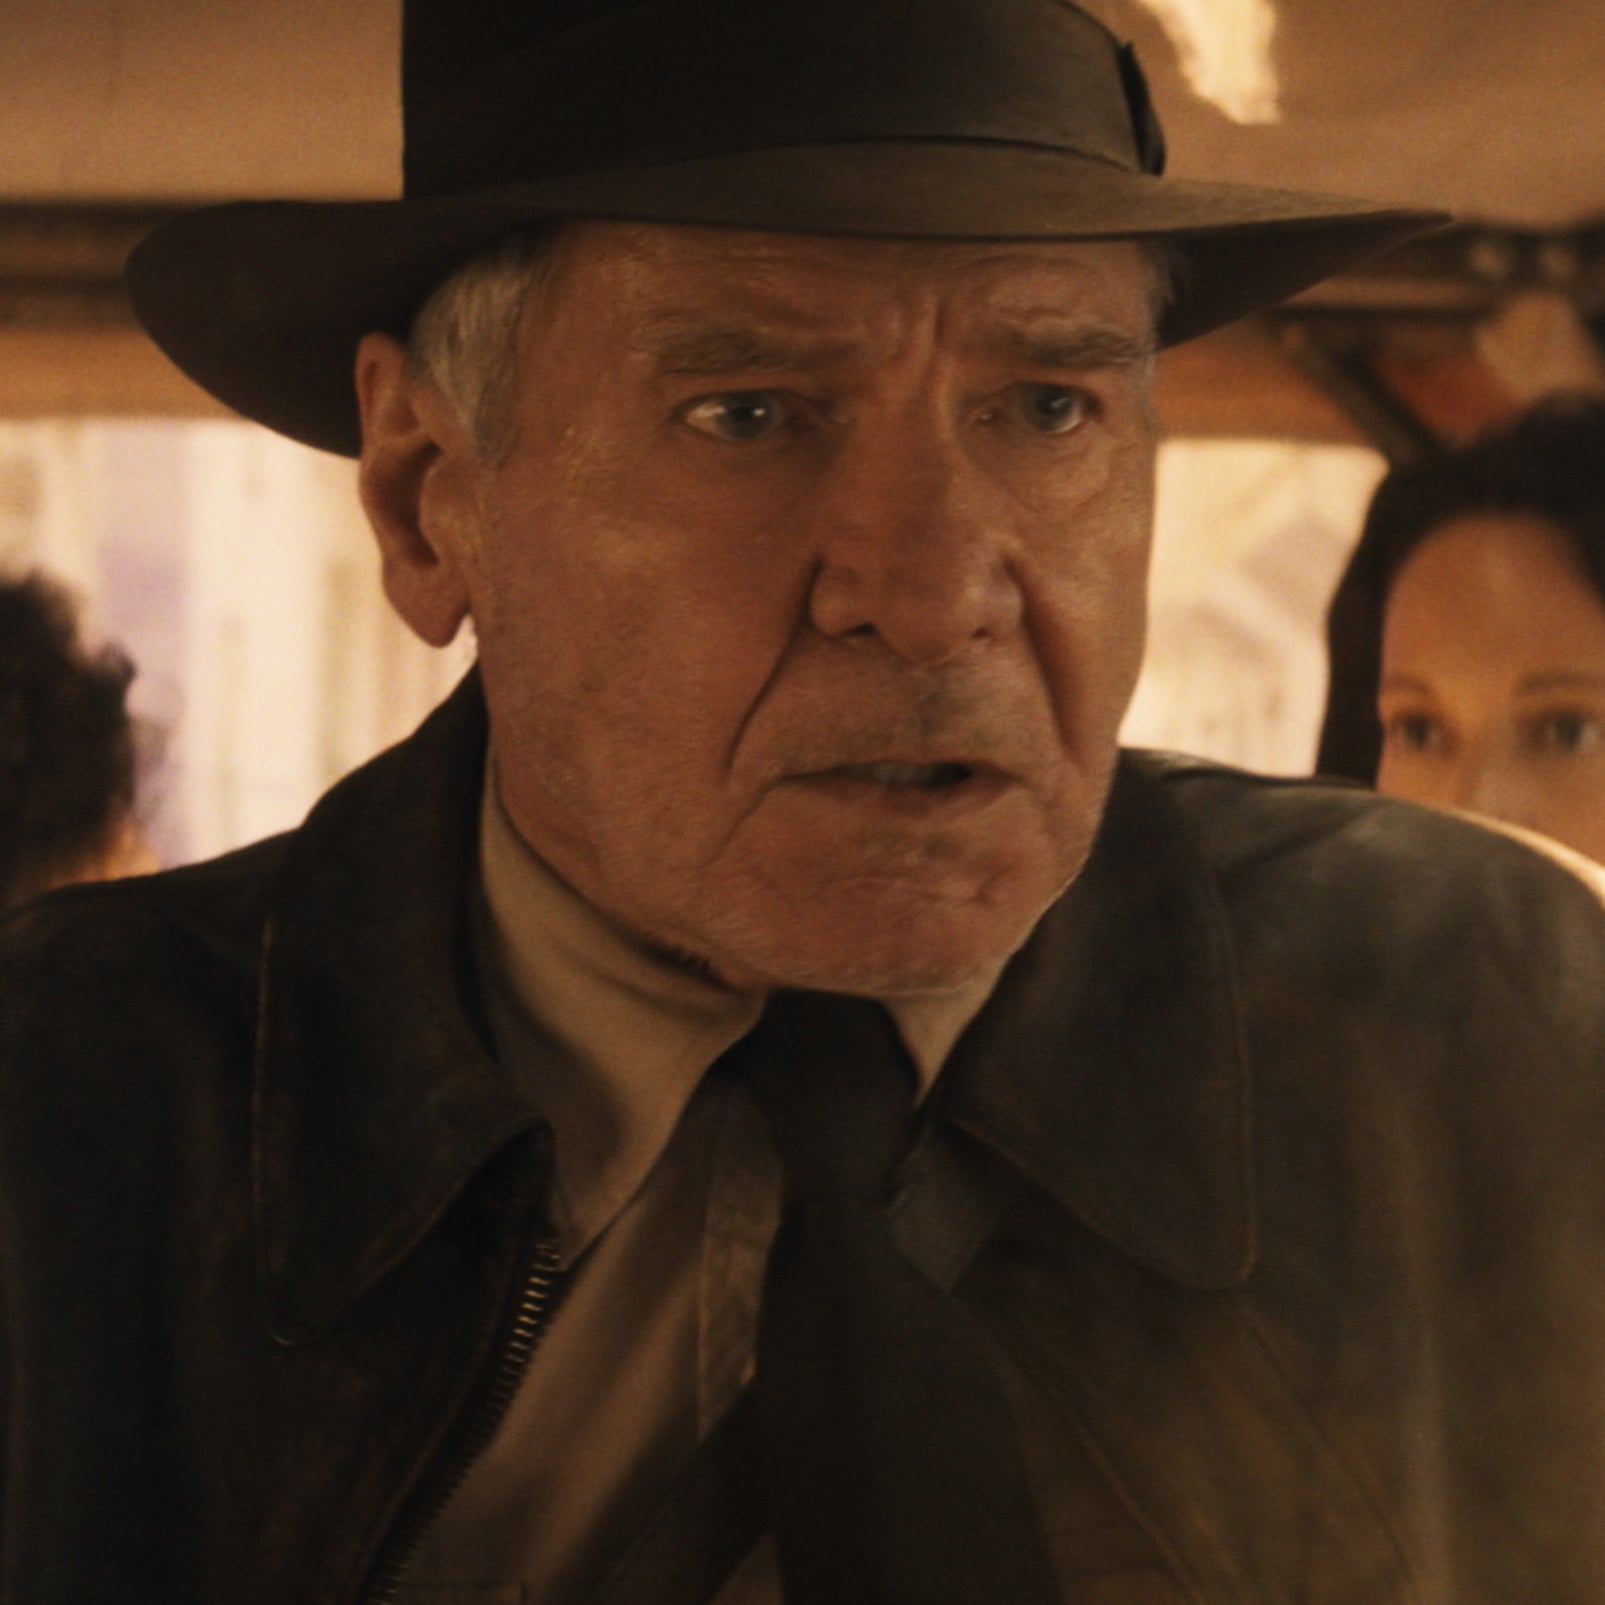 Indiana Jones 5 release date, cast, trailer and more